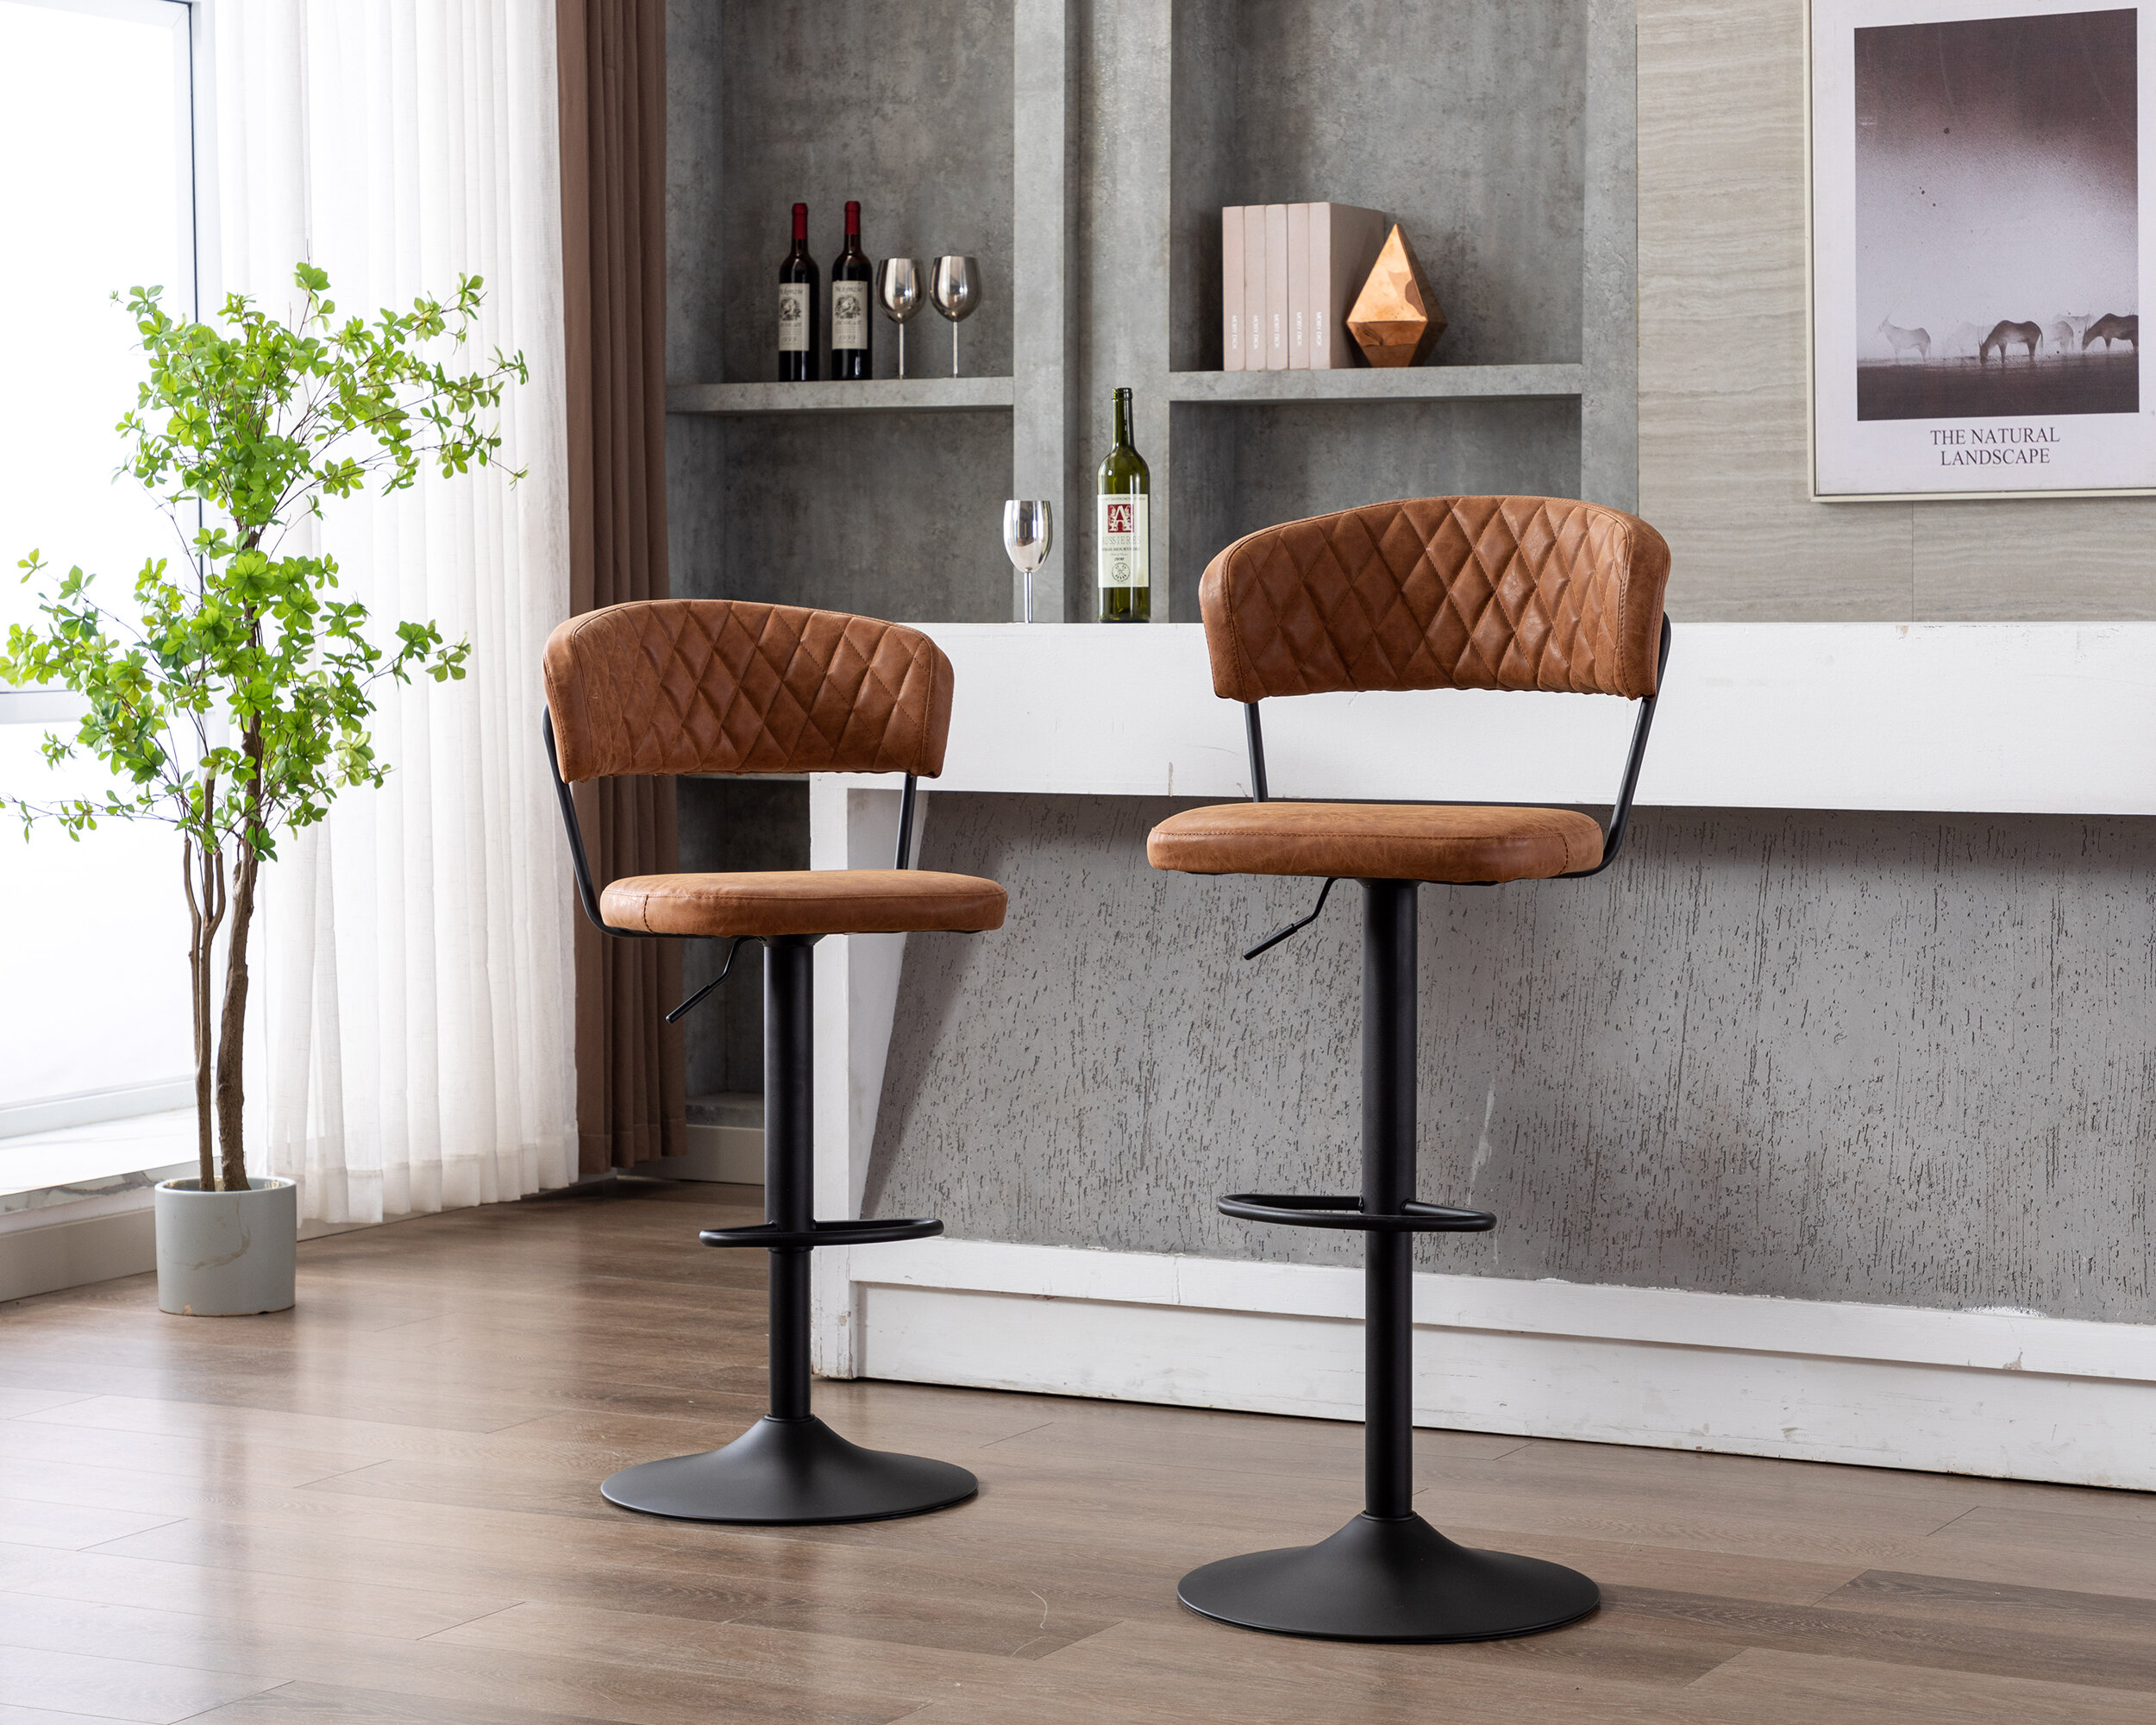 Adjustable Barstool Brown Swivel Bar Stool Chairs with Low Back Brown Pub Kitchen Counter Height Stool Industrial Bar Stool Bar Stools Set of 2 